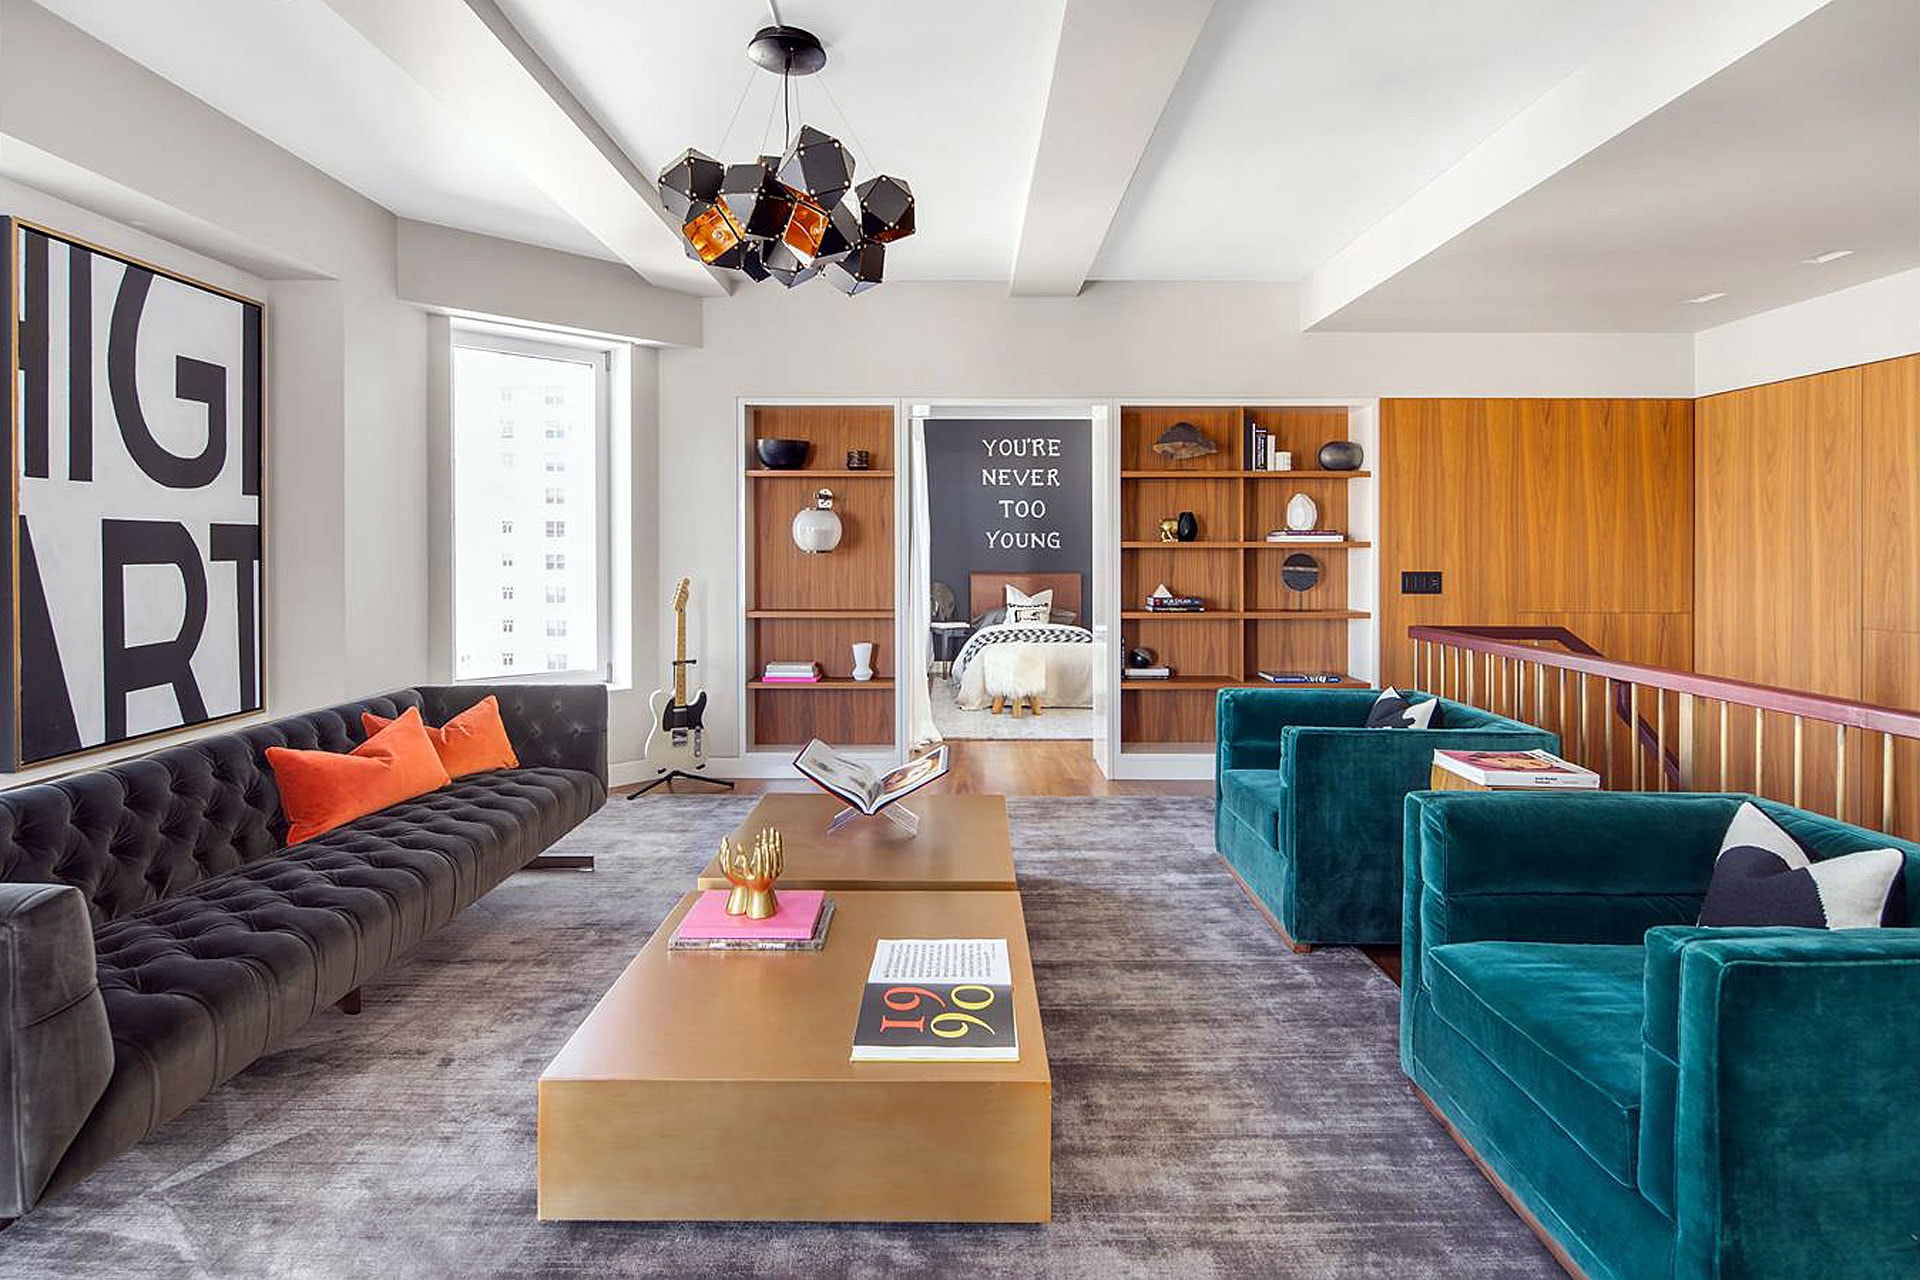 Keith Richards Greenwich Village Penthouse